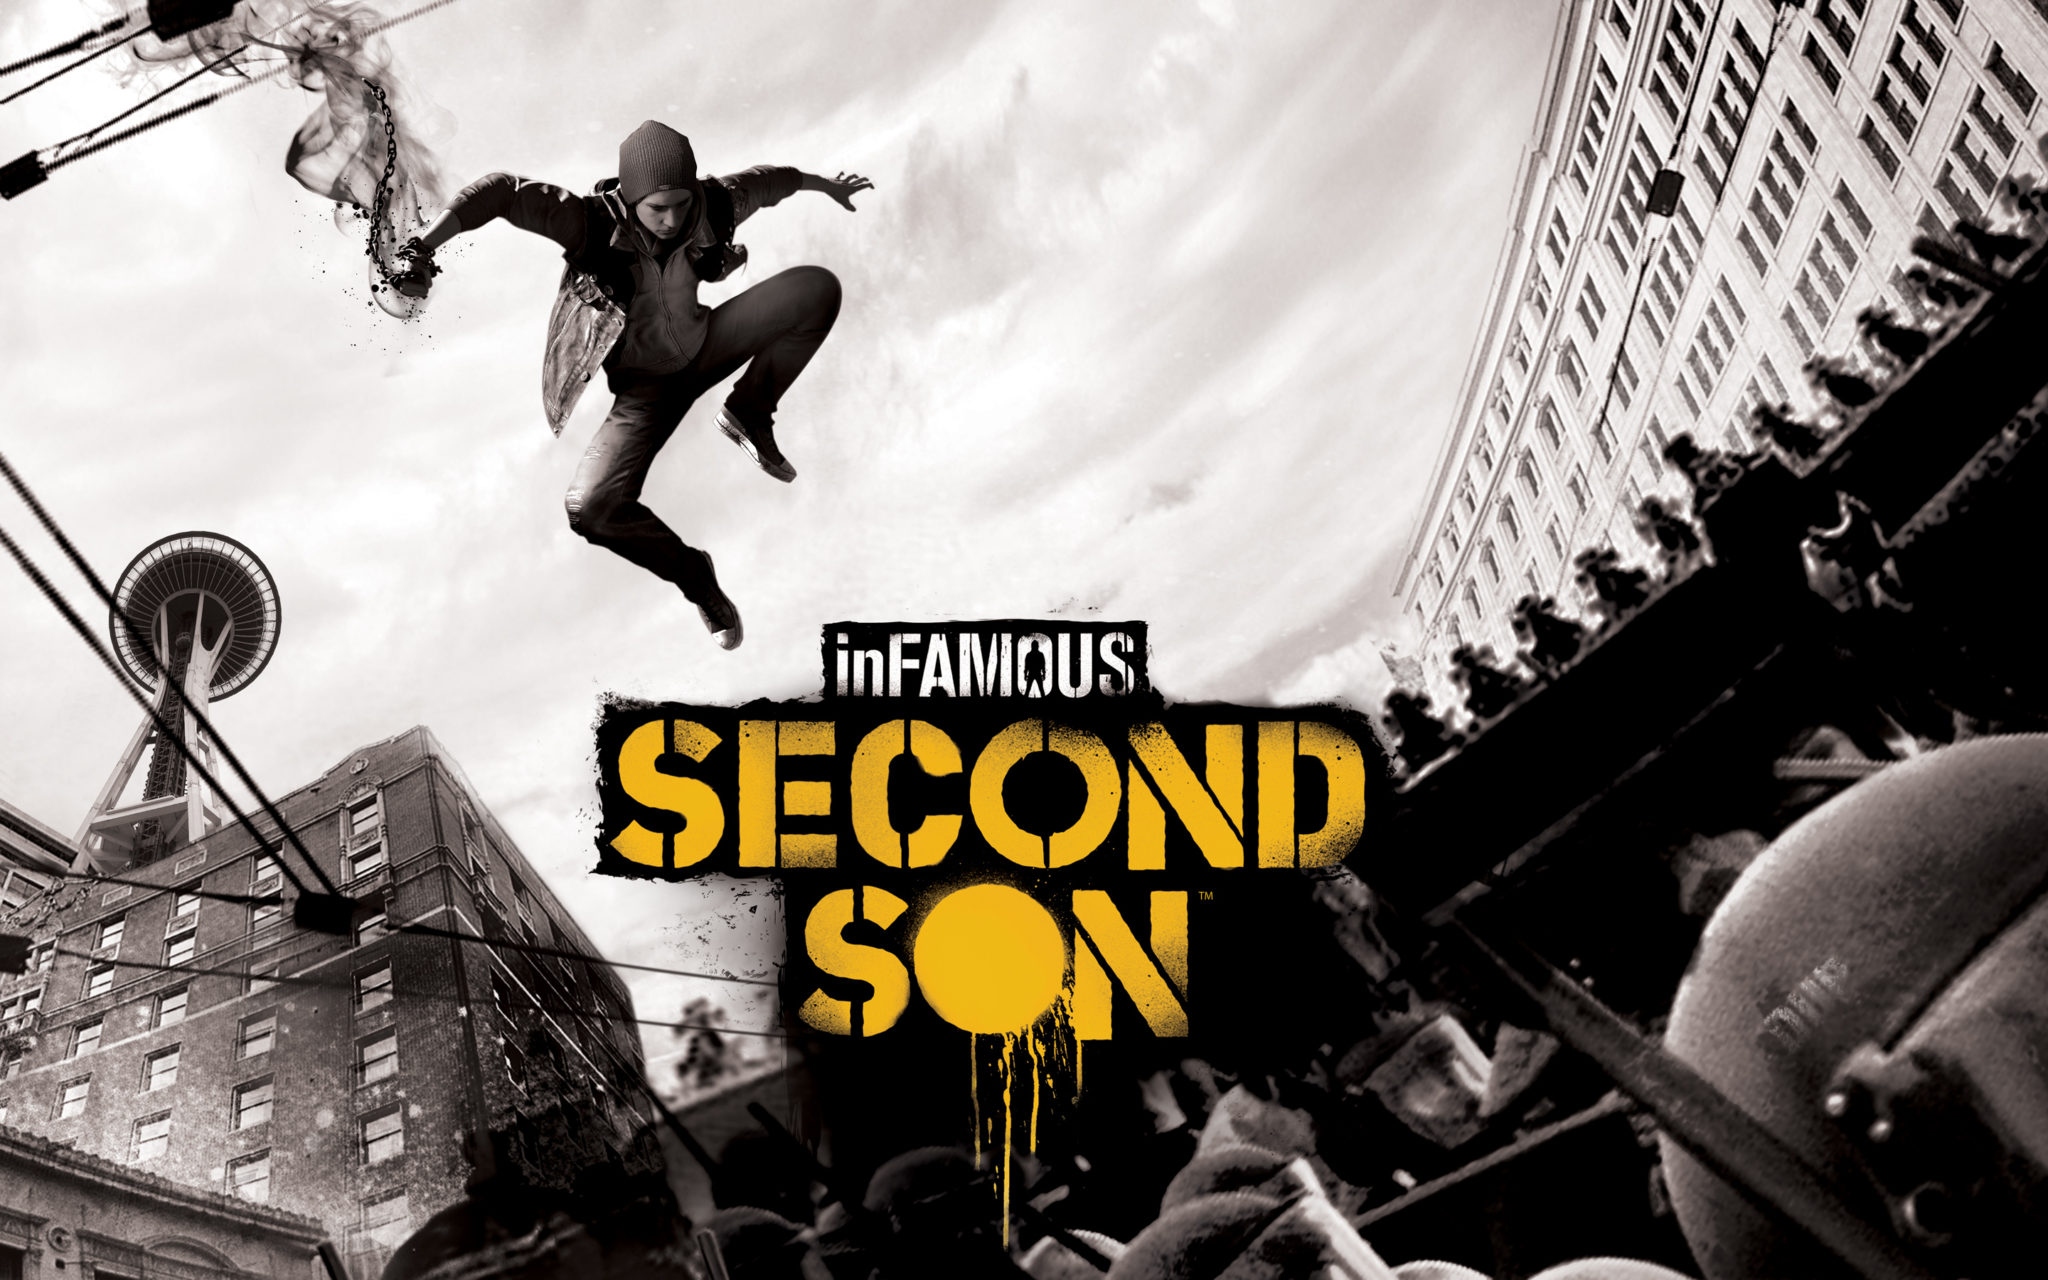 Infamous Second son intro